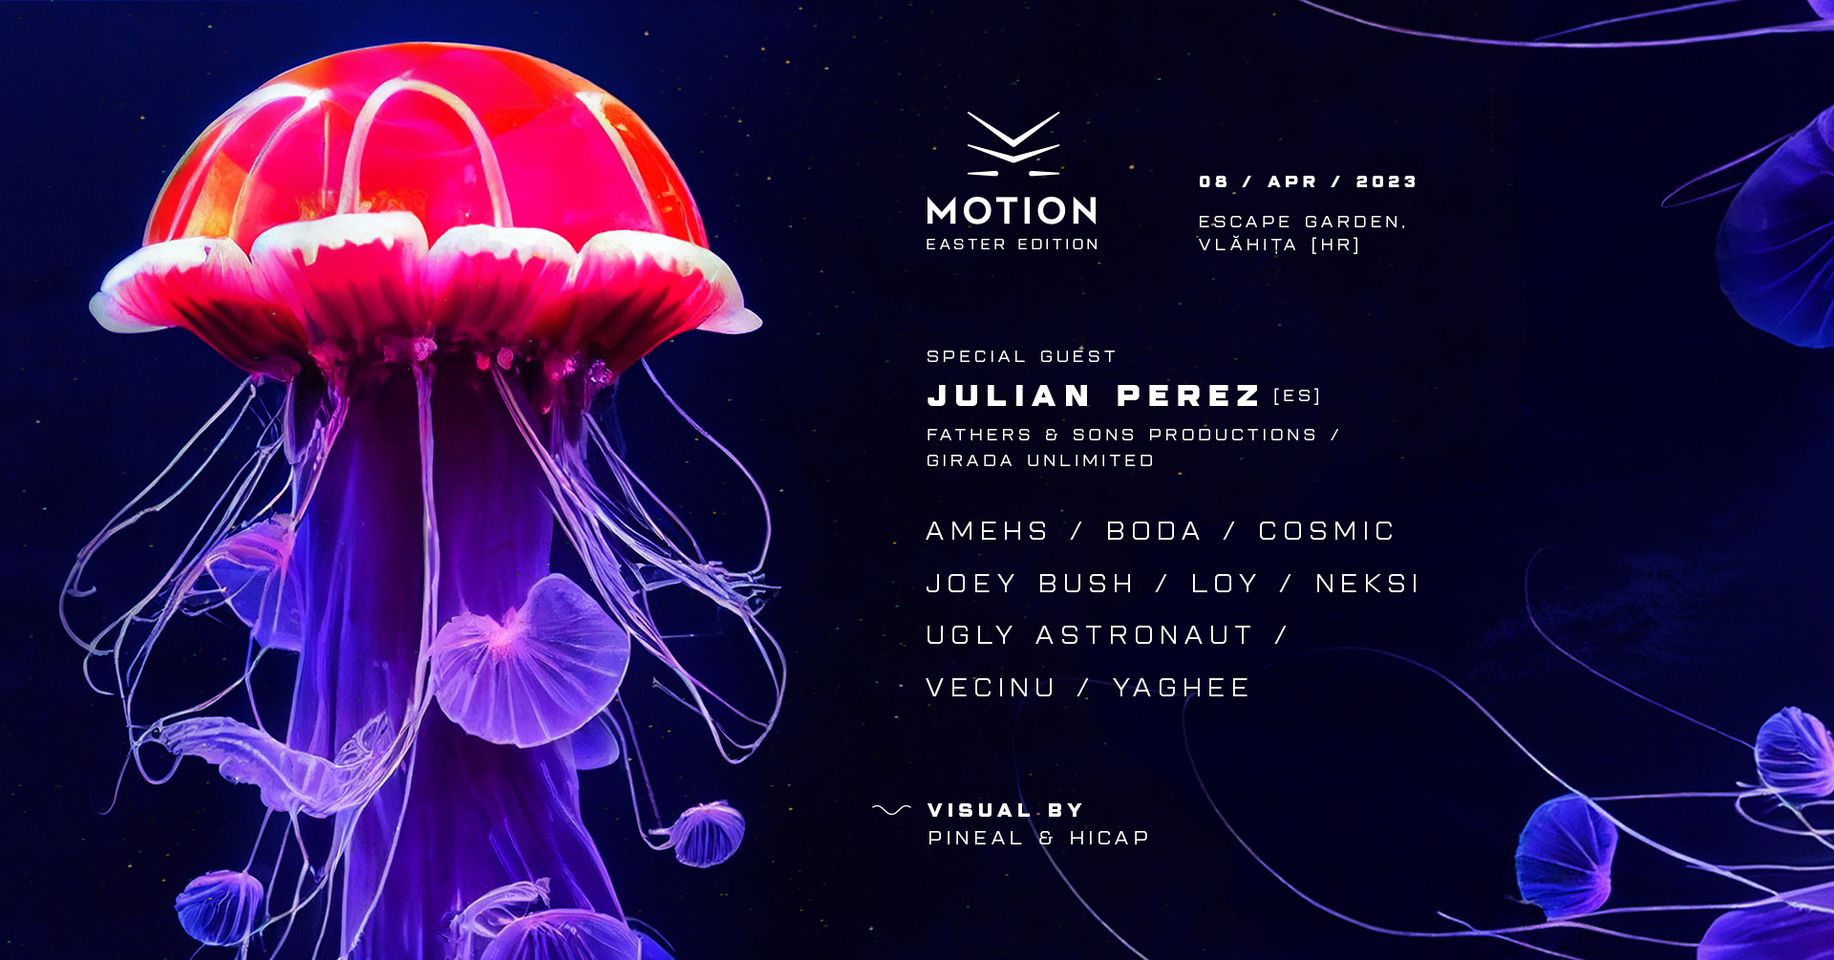 Motion Easter Edition w/ Julian Perez / LOy & more.